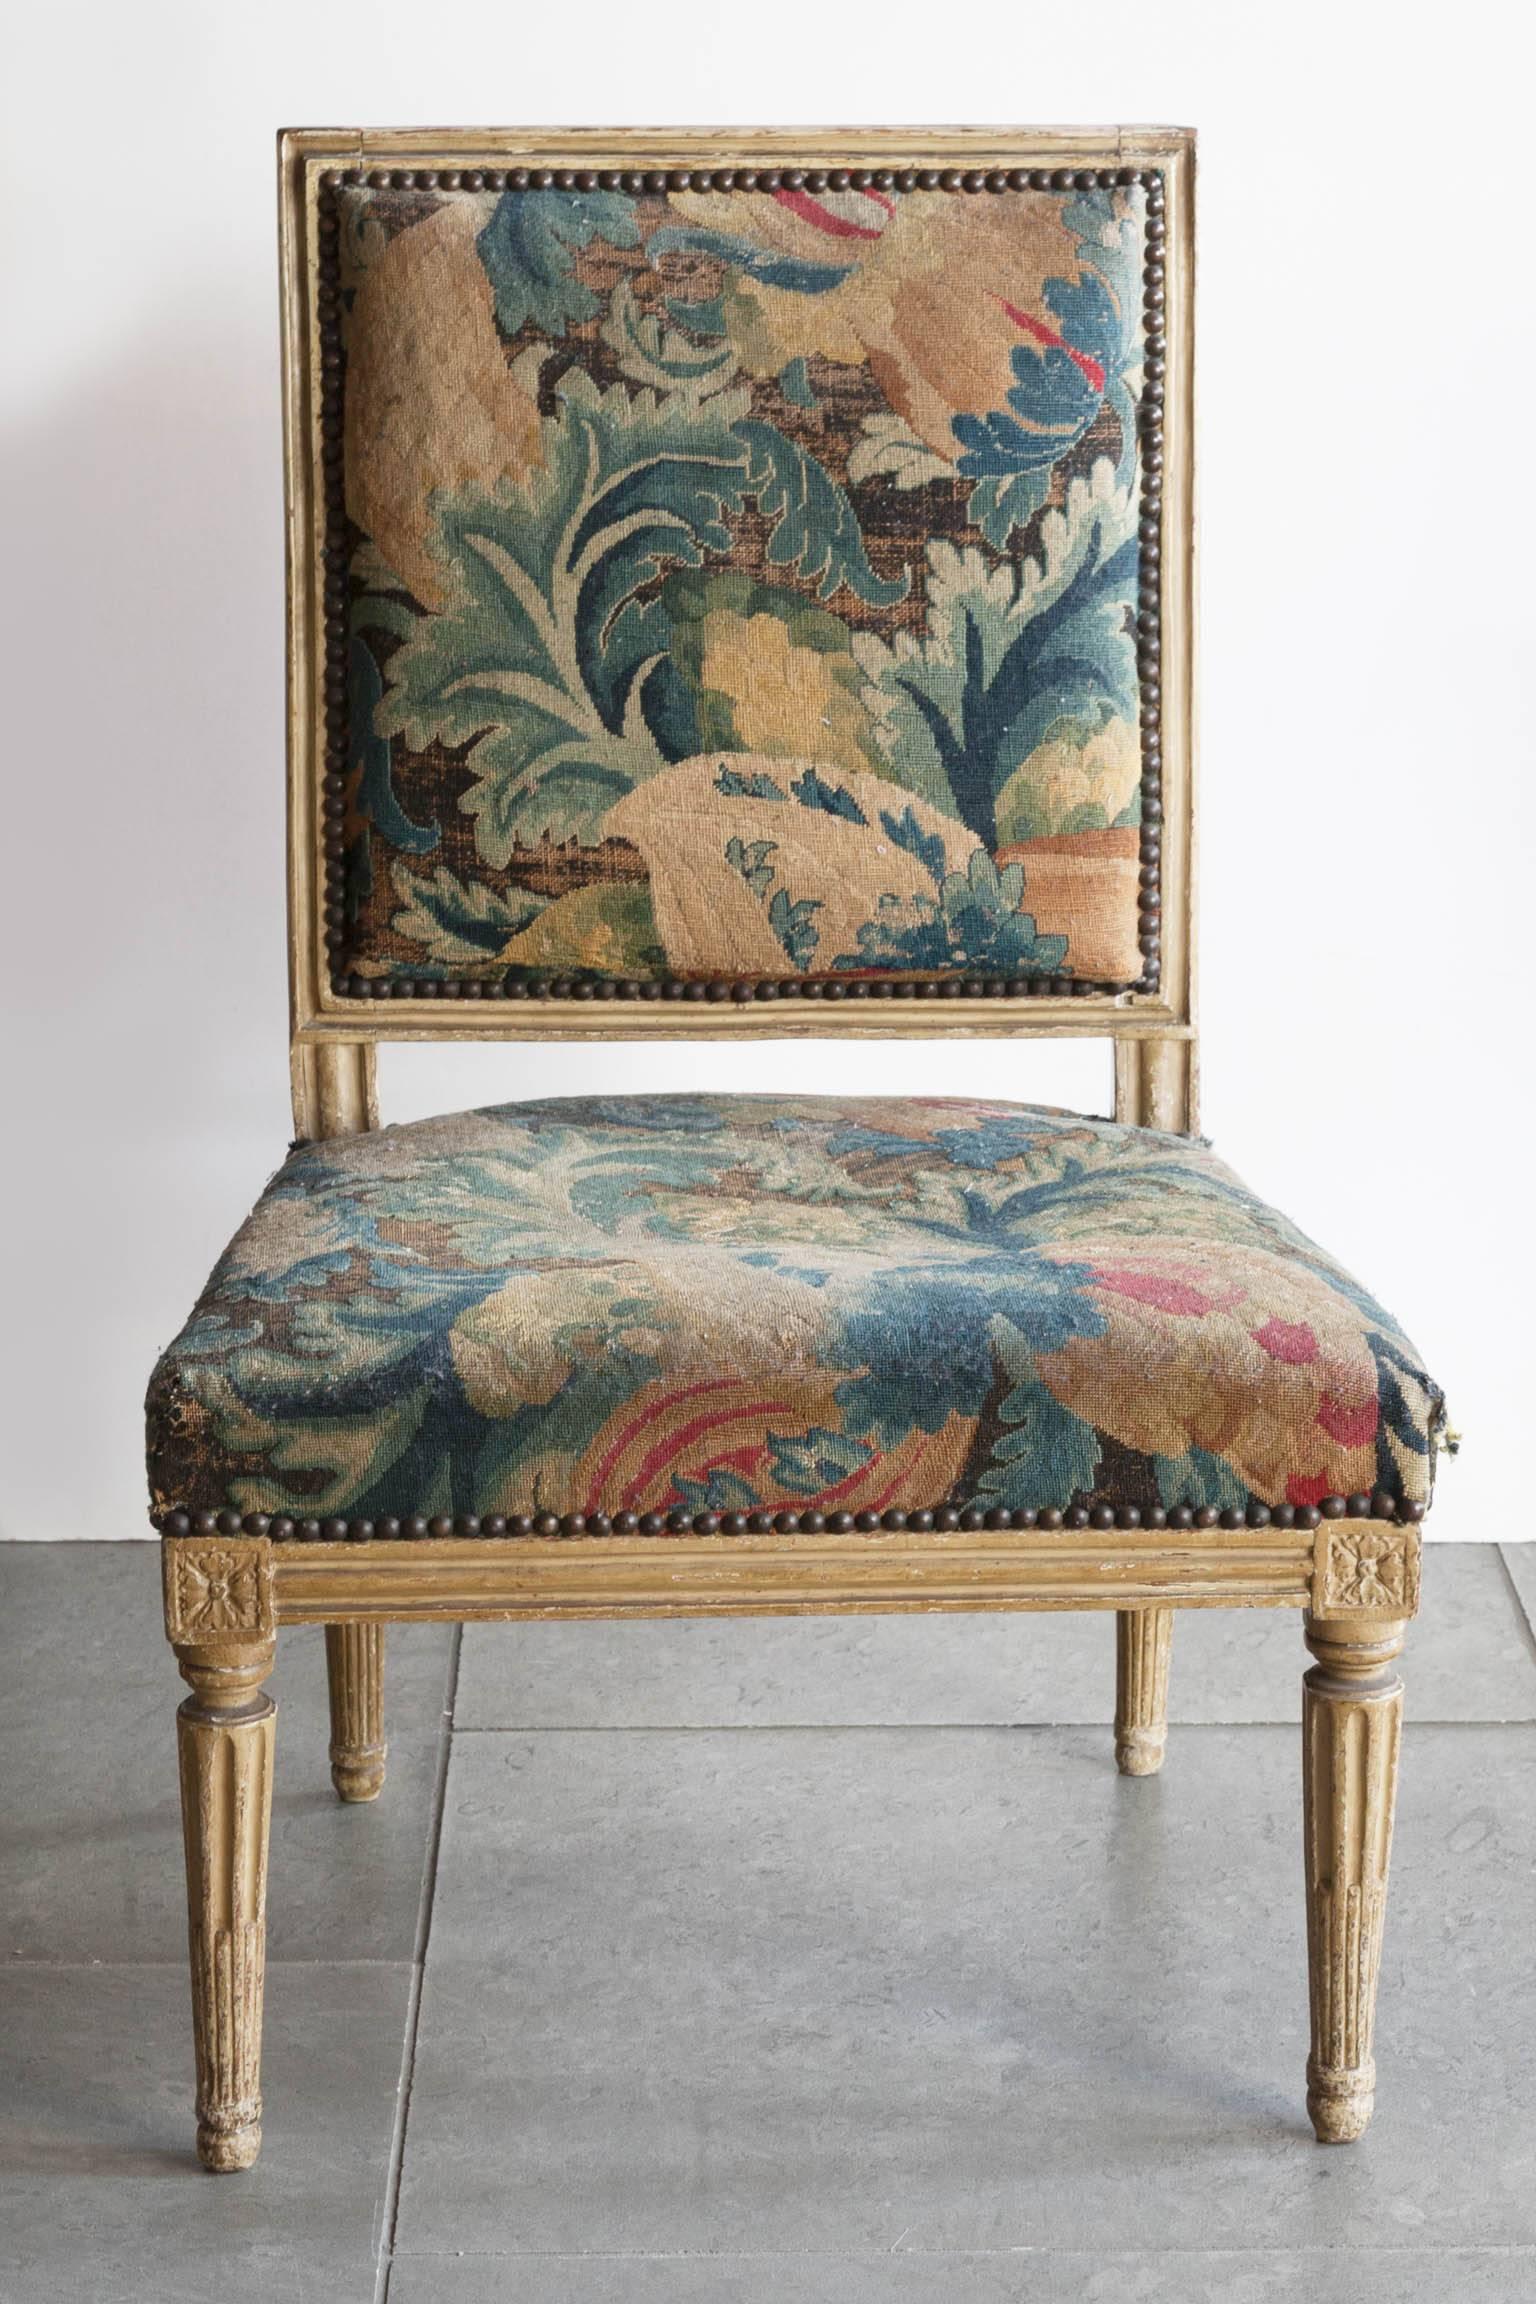 With four carved fluted legs, carved square back and carved rosettes on the corners of the apron. Original paintwork. Upholstered in petit point. Stamped by the maker, C. Séné on the underside of the seat frame,
France, circa 1785.
In original